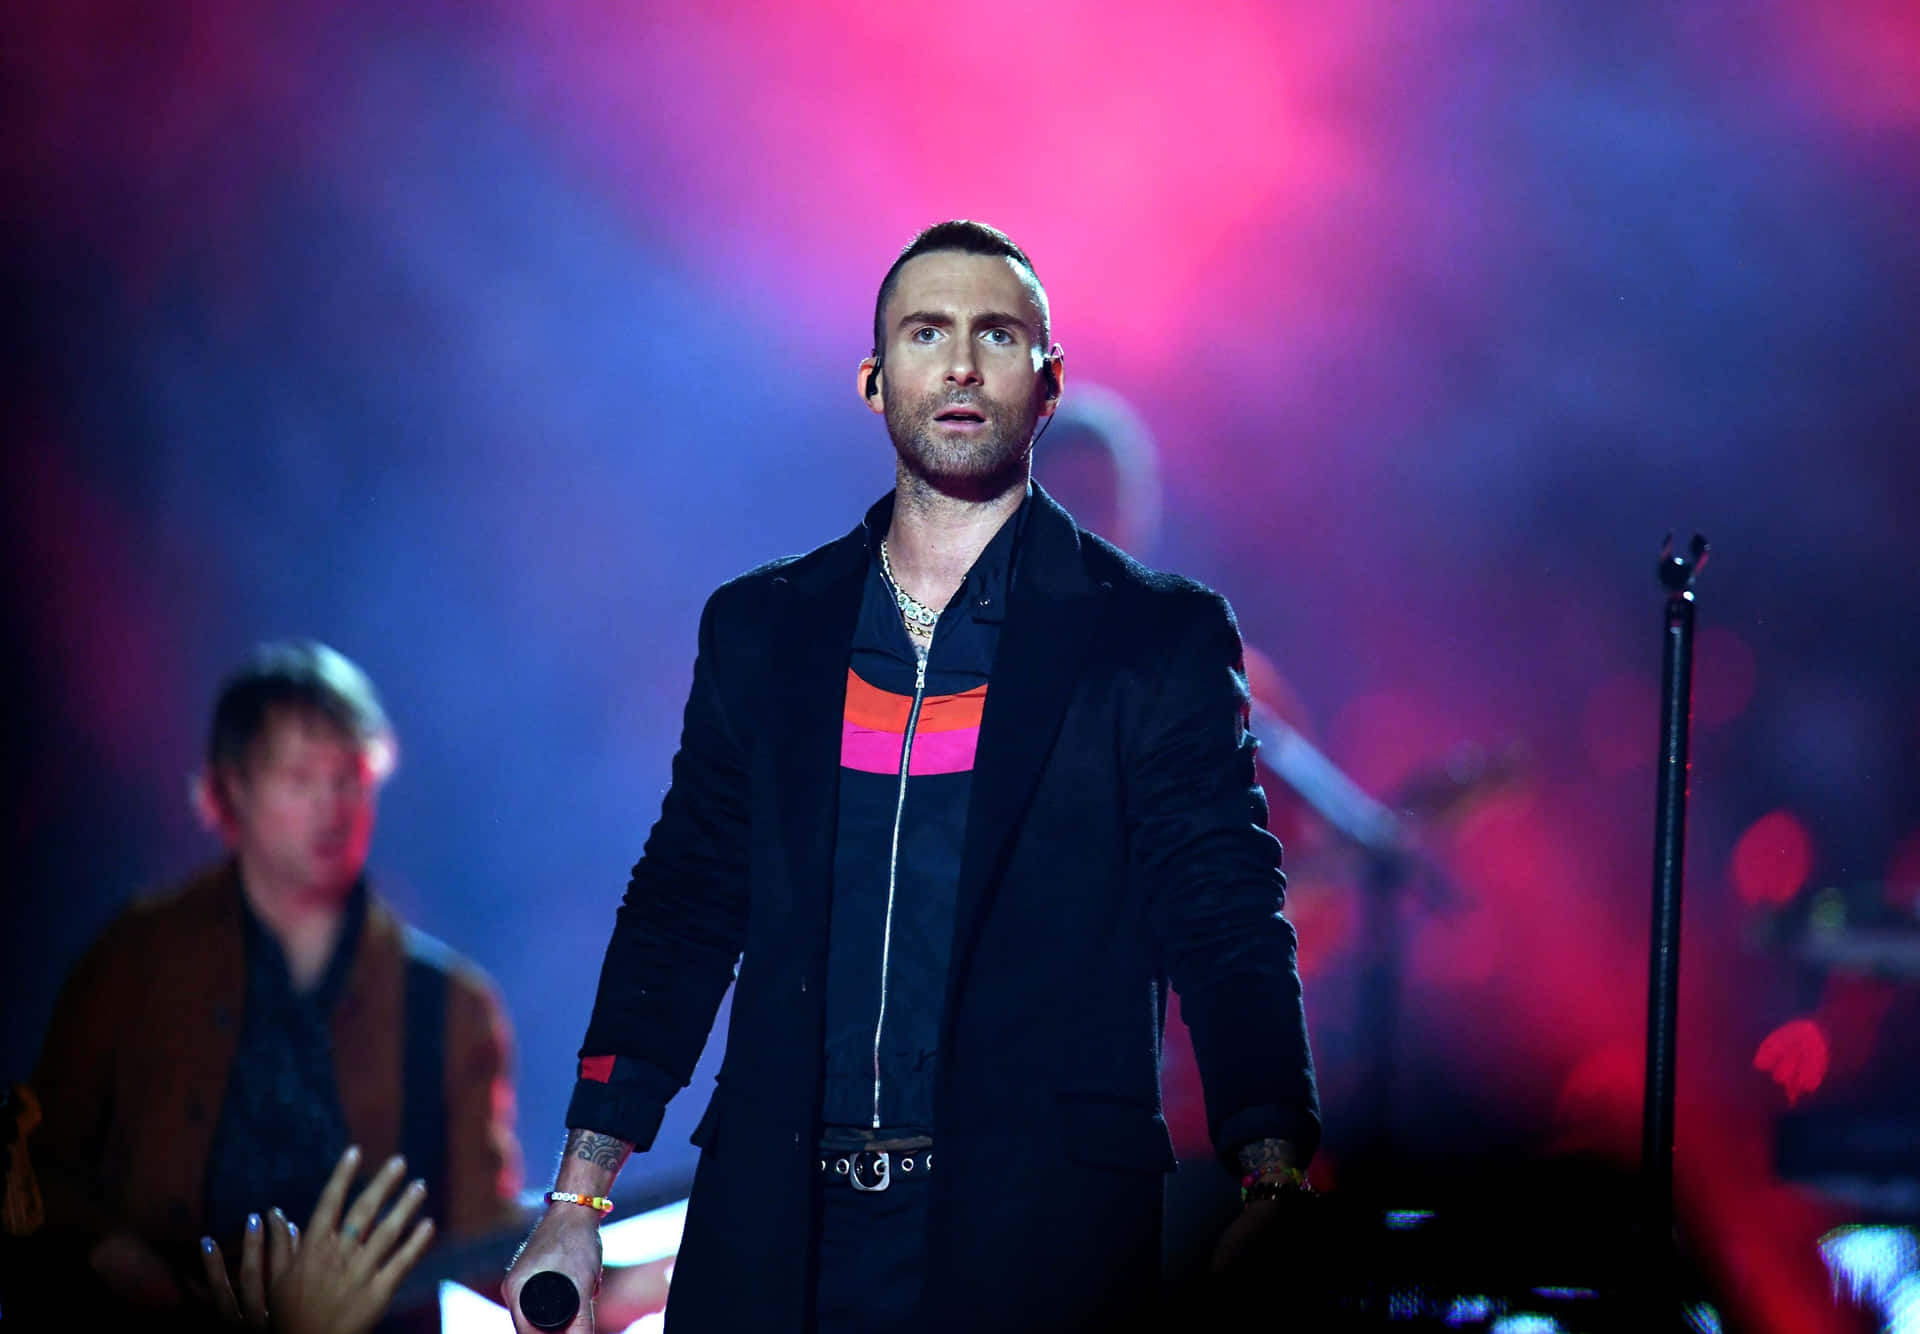 Adam Levine, Lead vocalist and guitarist of the pop-rock band Maroon 5.